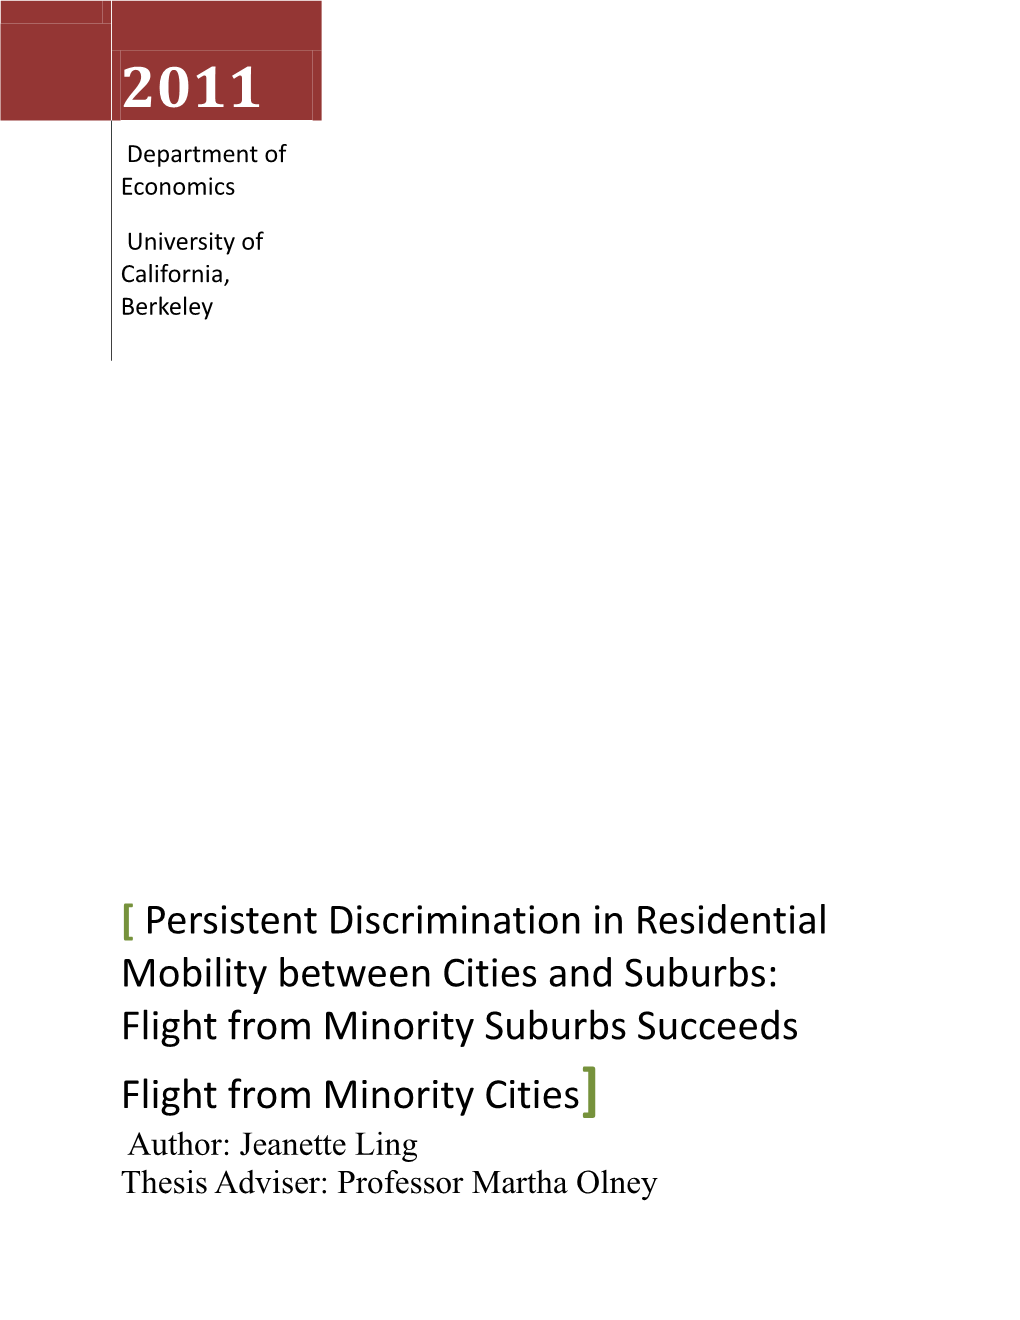 Persistent Discrimination in Residential Mobility Between Cities